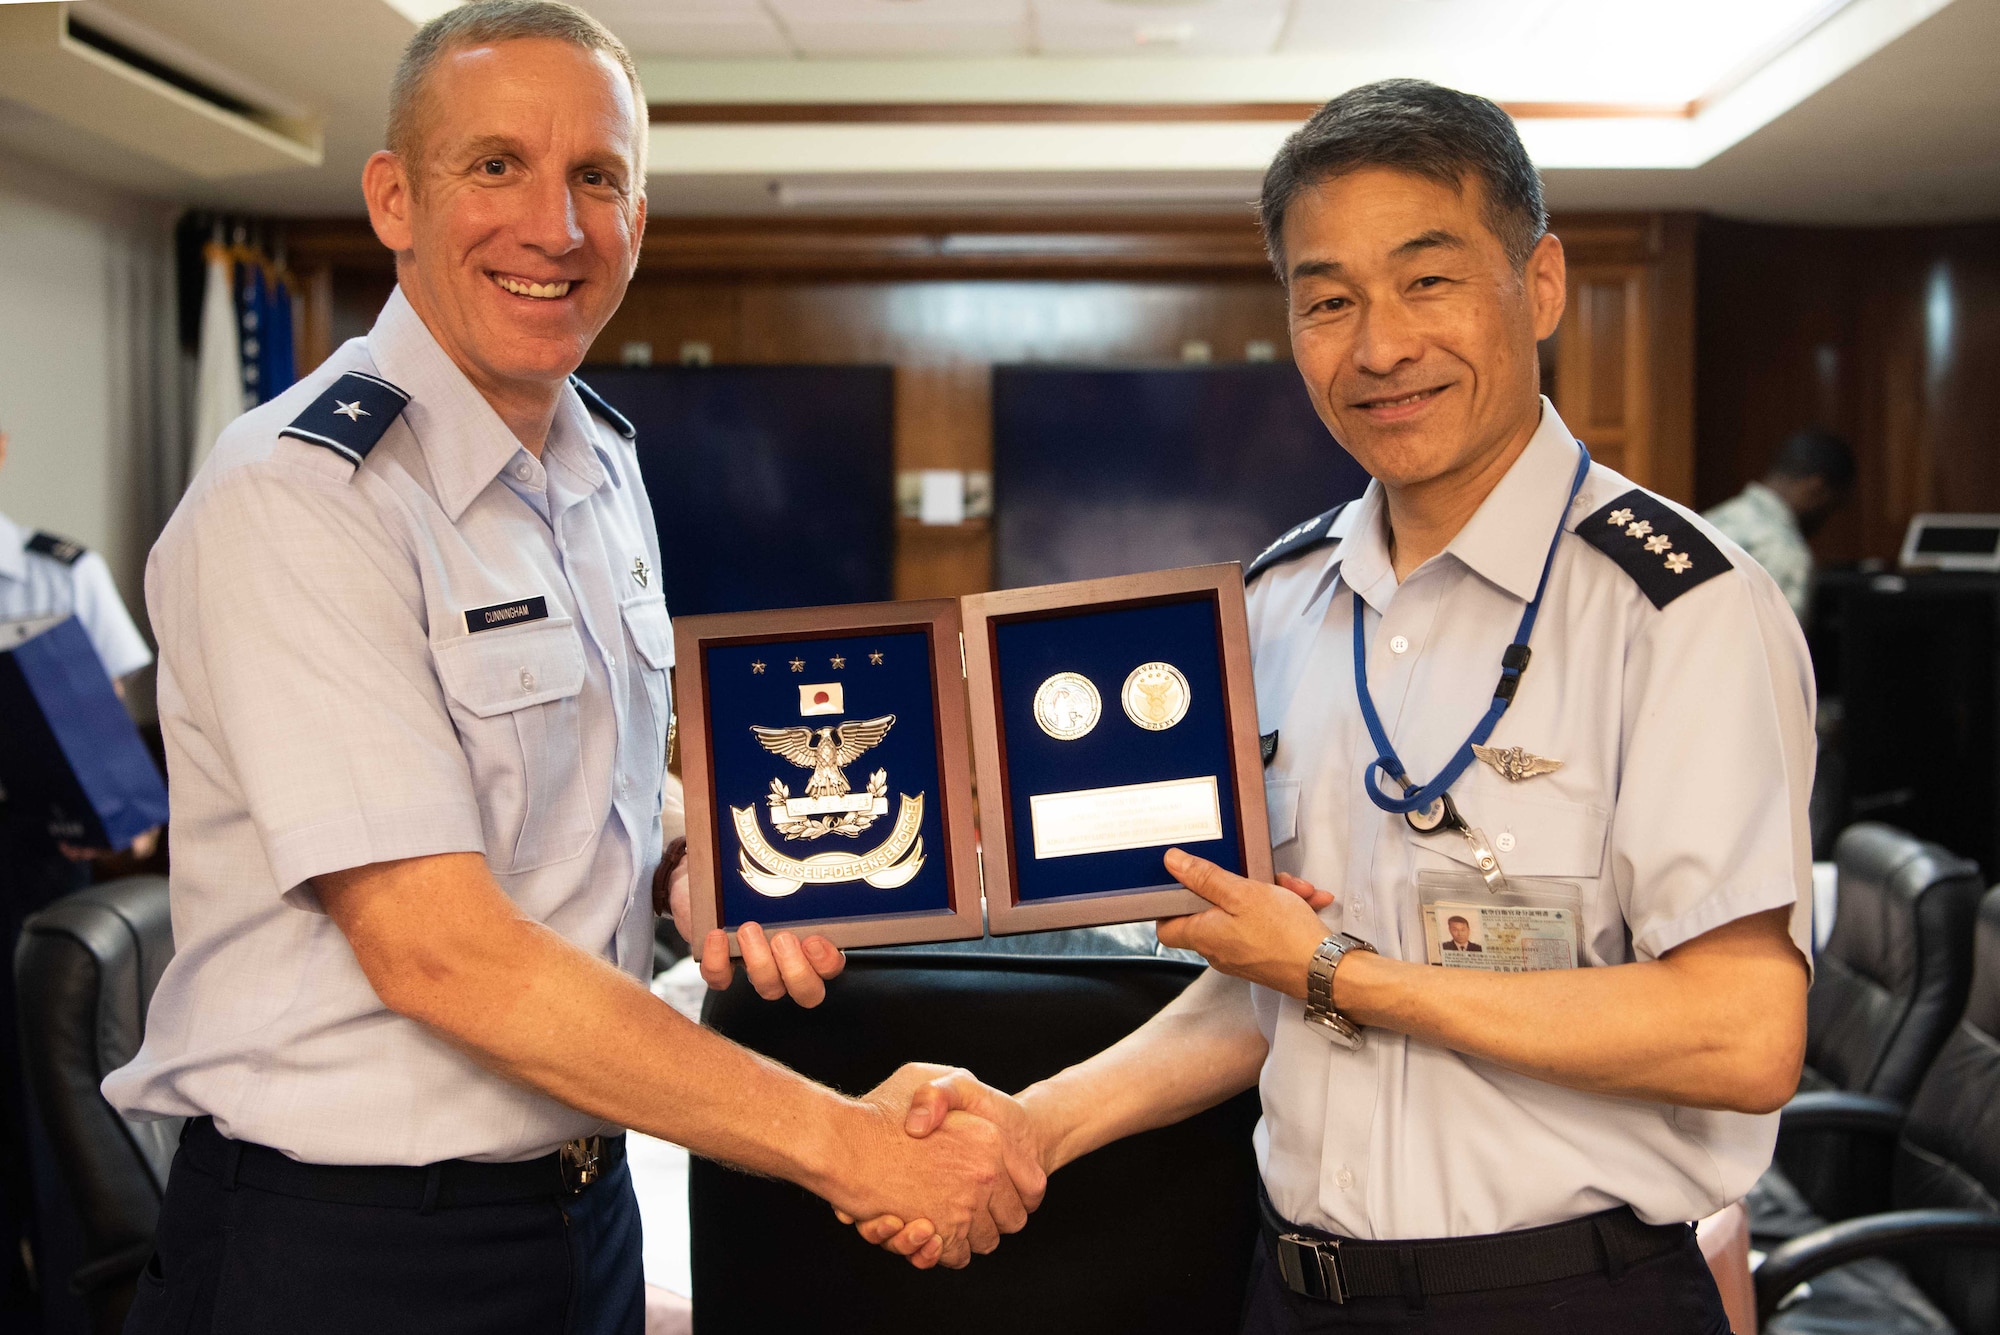 U.S. Air Force Brig. Gen. Case Cunningham, 18th Wing commander explains the origin of Kadena Air Base Habu Hill to Japan Air Self -Defense Force Chief of Staff Gen. Yoshinari Marumo, during a visit to Kadena AB, Japan, May 21, 2019. While visiting, Cunningham and Marumo discussed key topics, such as the vital role of both U.S. and Japanese Airmen in ensuring regional security and stability. (U.S. Air Force photo by Senior Airman Kristan Campbell)